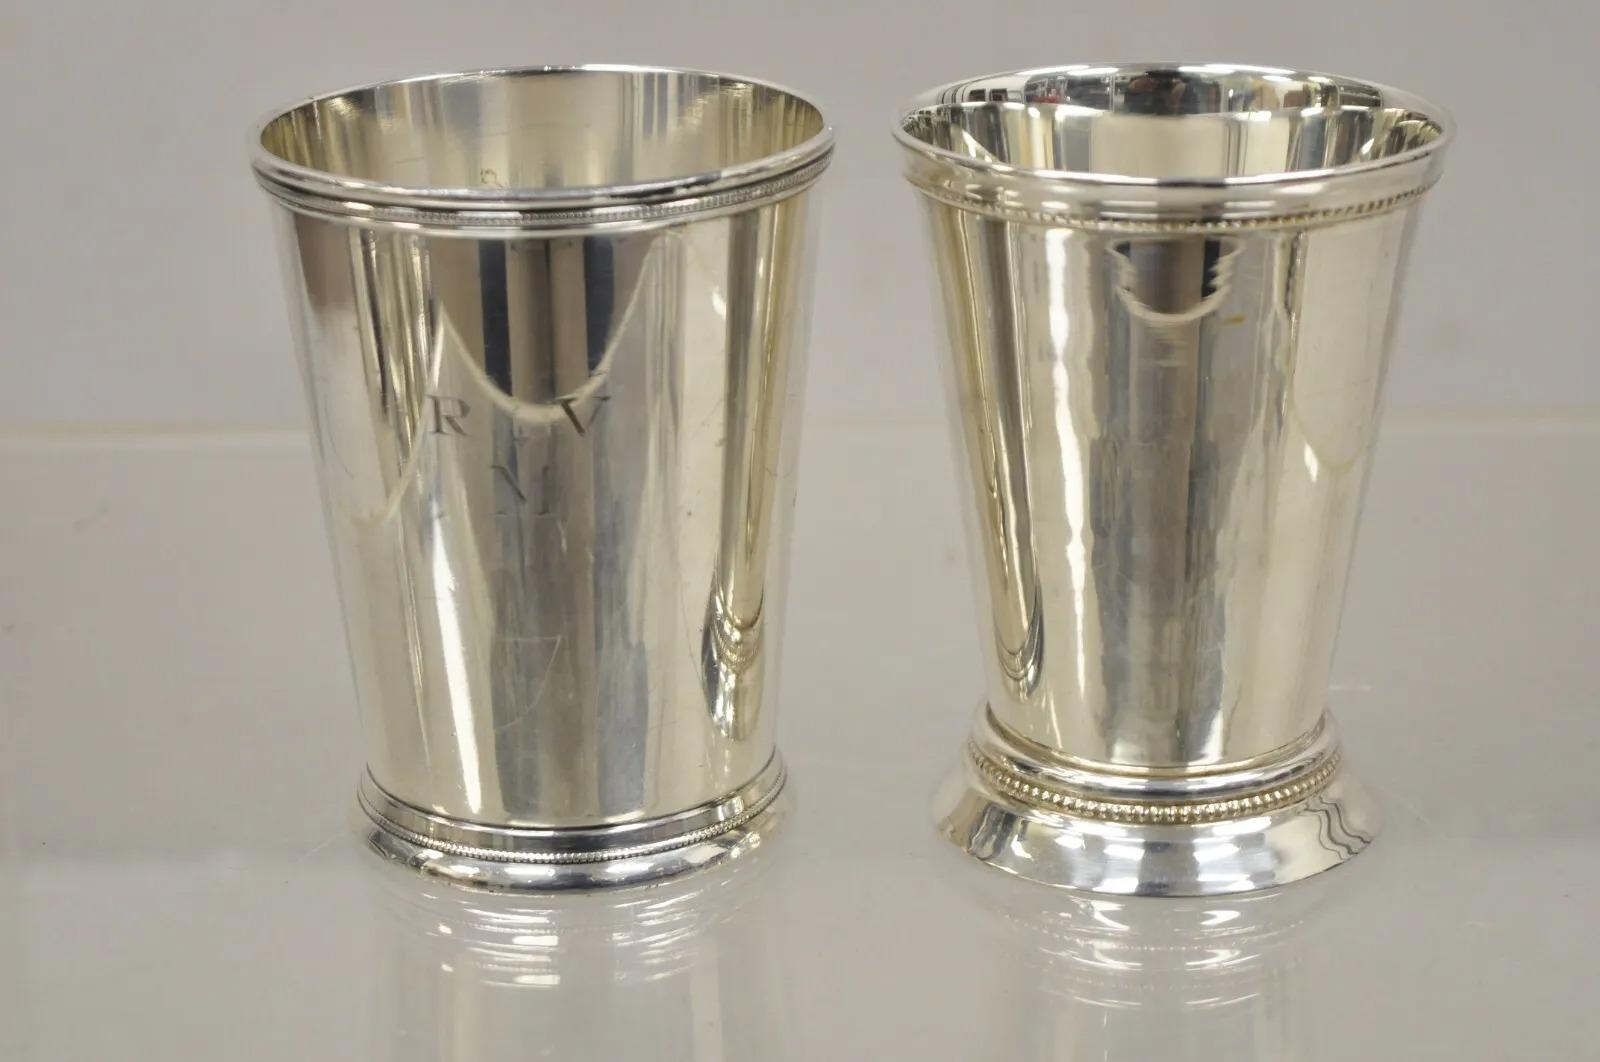 2 Vintage Silver Plated Mint Julep Cups Tumblers 1 with Monogram - 2 Pieces For Sale 6